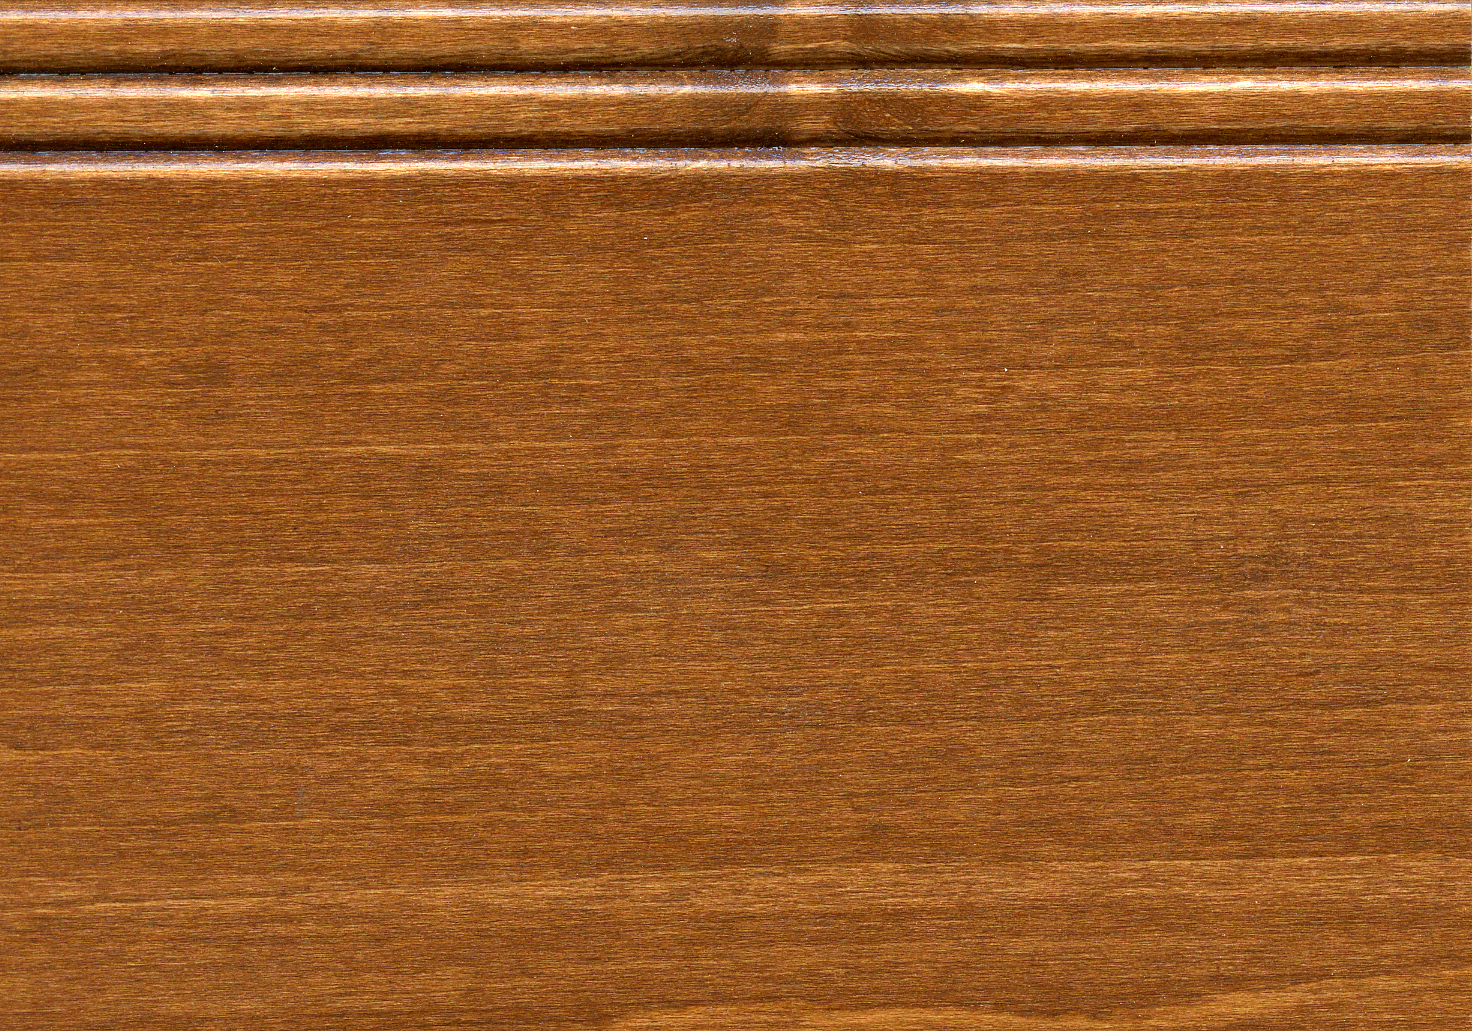 Maple - Fruitwood Stain